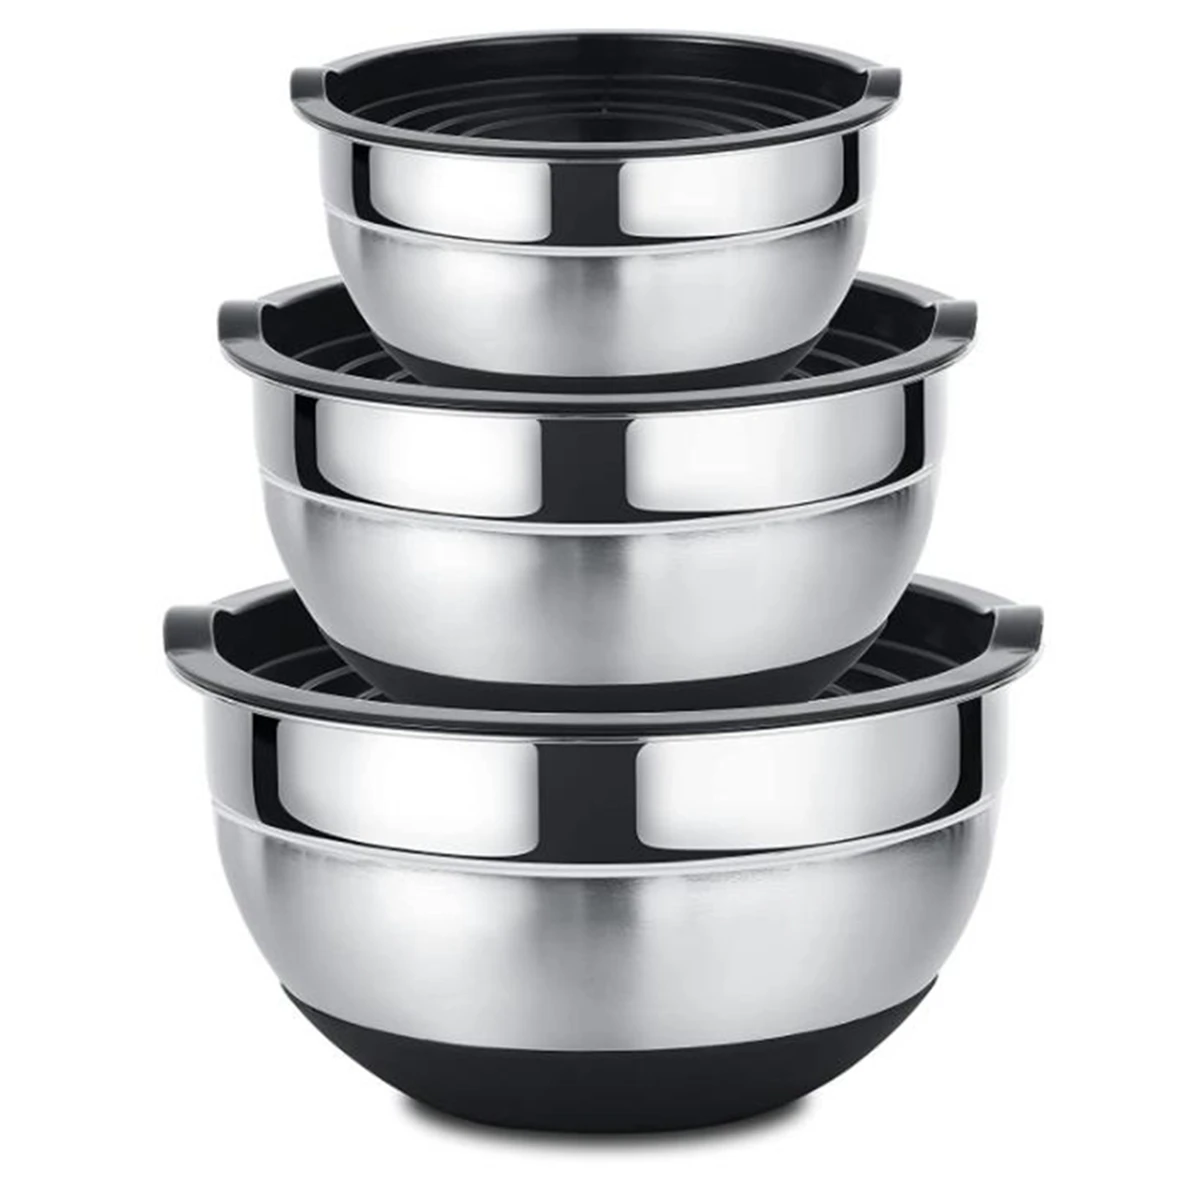 

Stainless Steel Mixing Bowls Salad Bowl Non-Slip Stackable Serving Bowl with Airtight Lids for Kitchen Cooking Baking Et